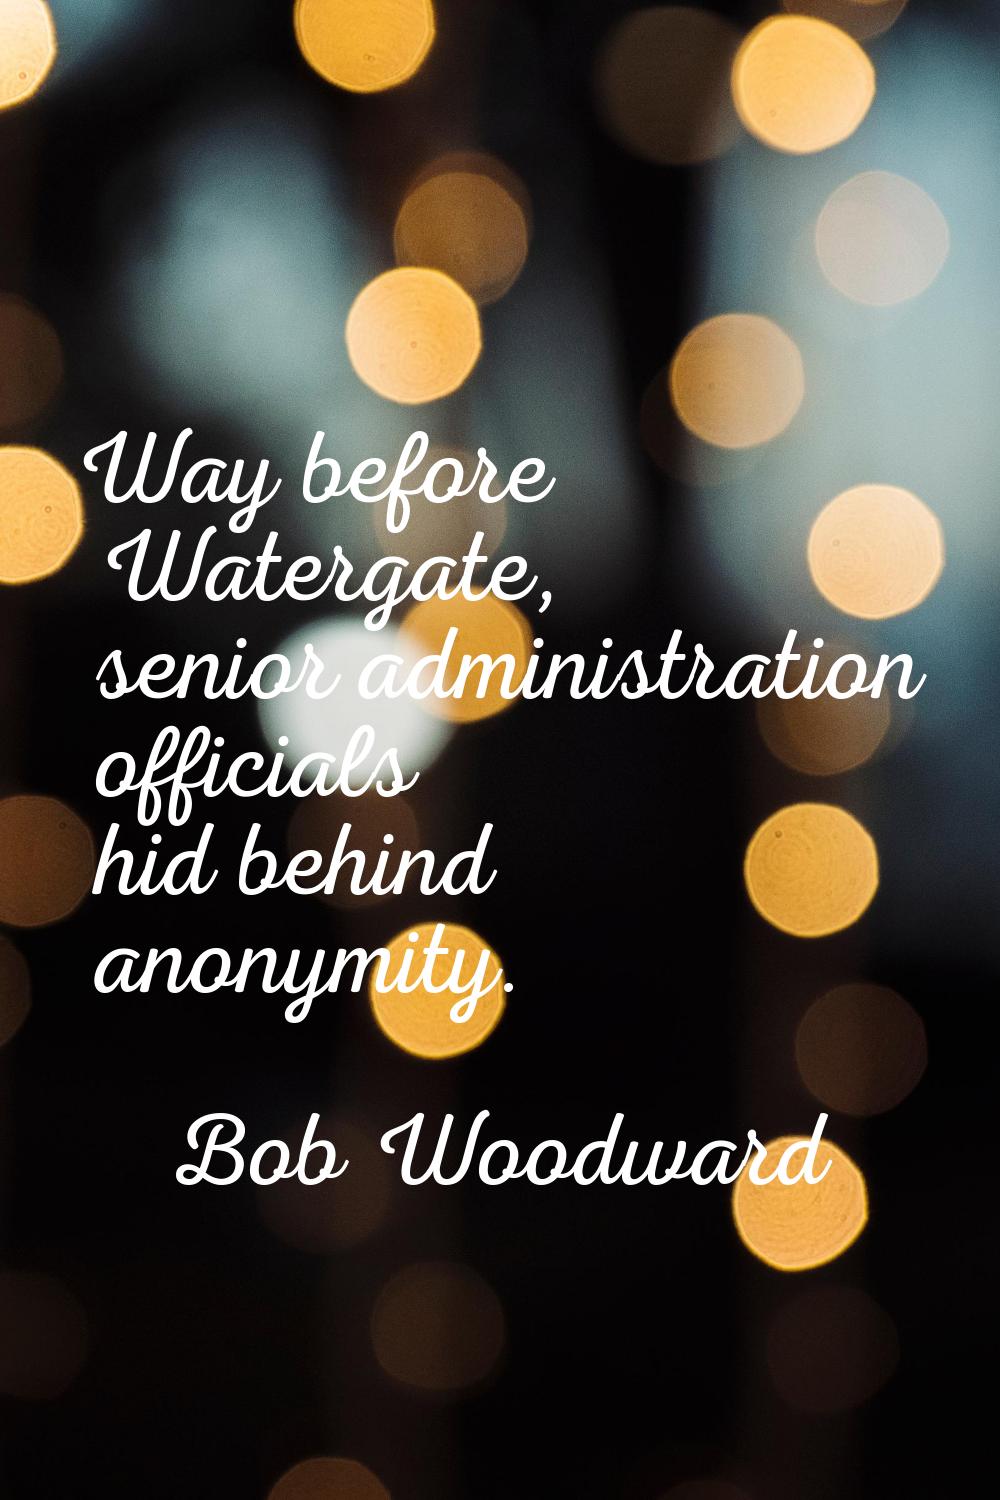 Way before Watergate, senior administration officials hid behind anonymity.